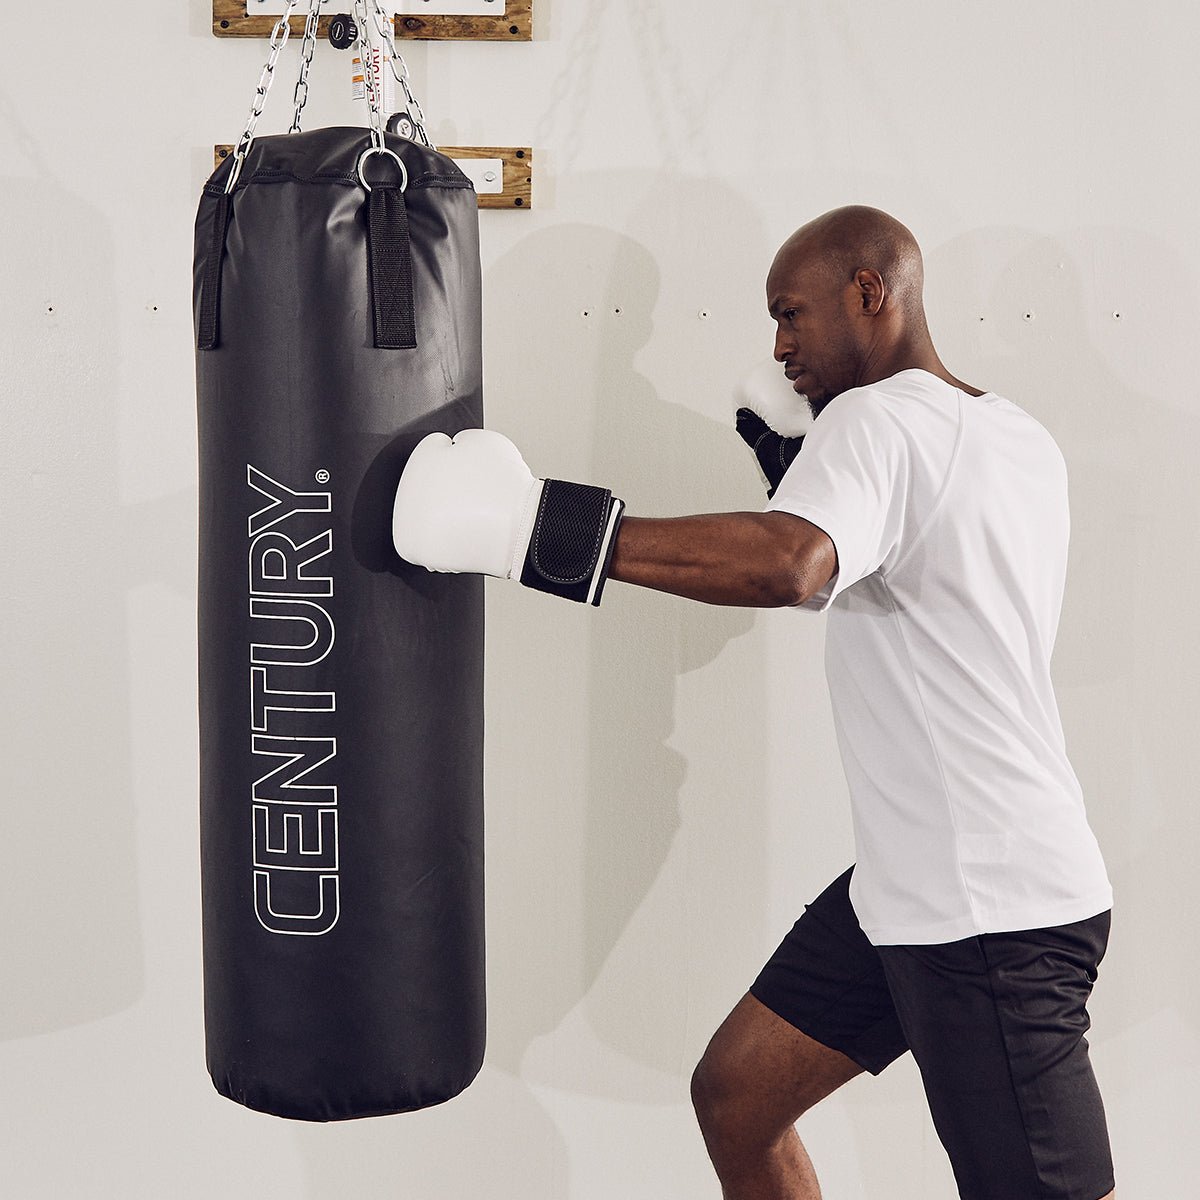 Everlast Dual Station Bag Stand and NevaTear 70 Pound Hanging Punching Bag  - Walmart.com